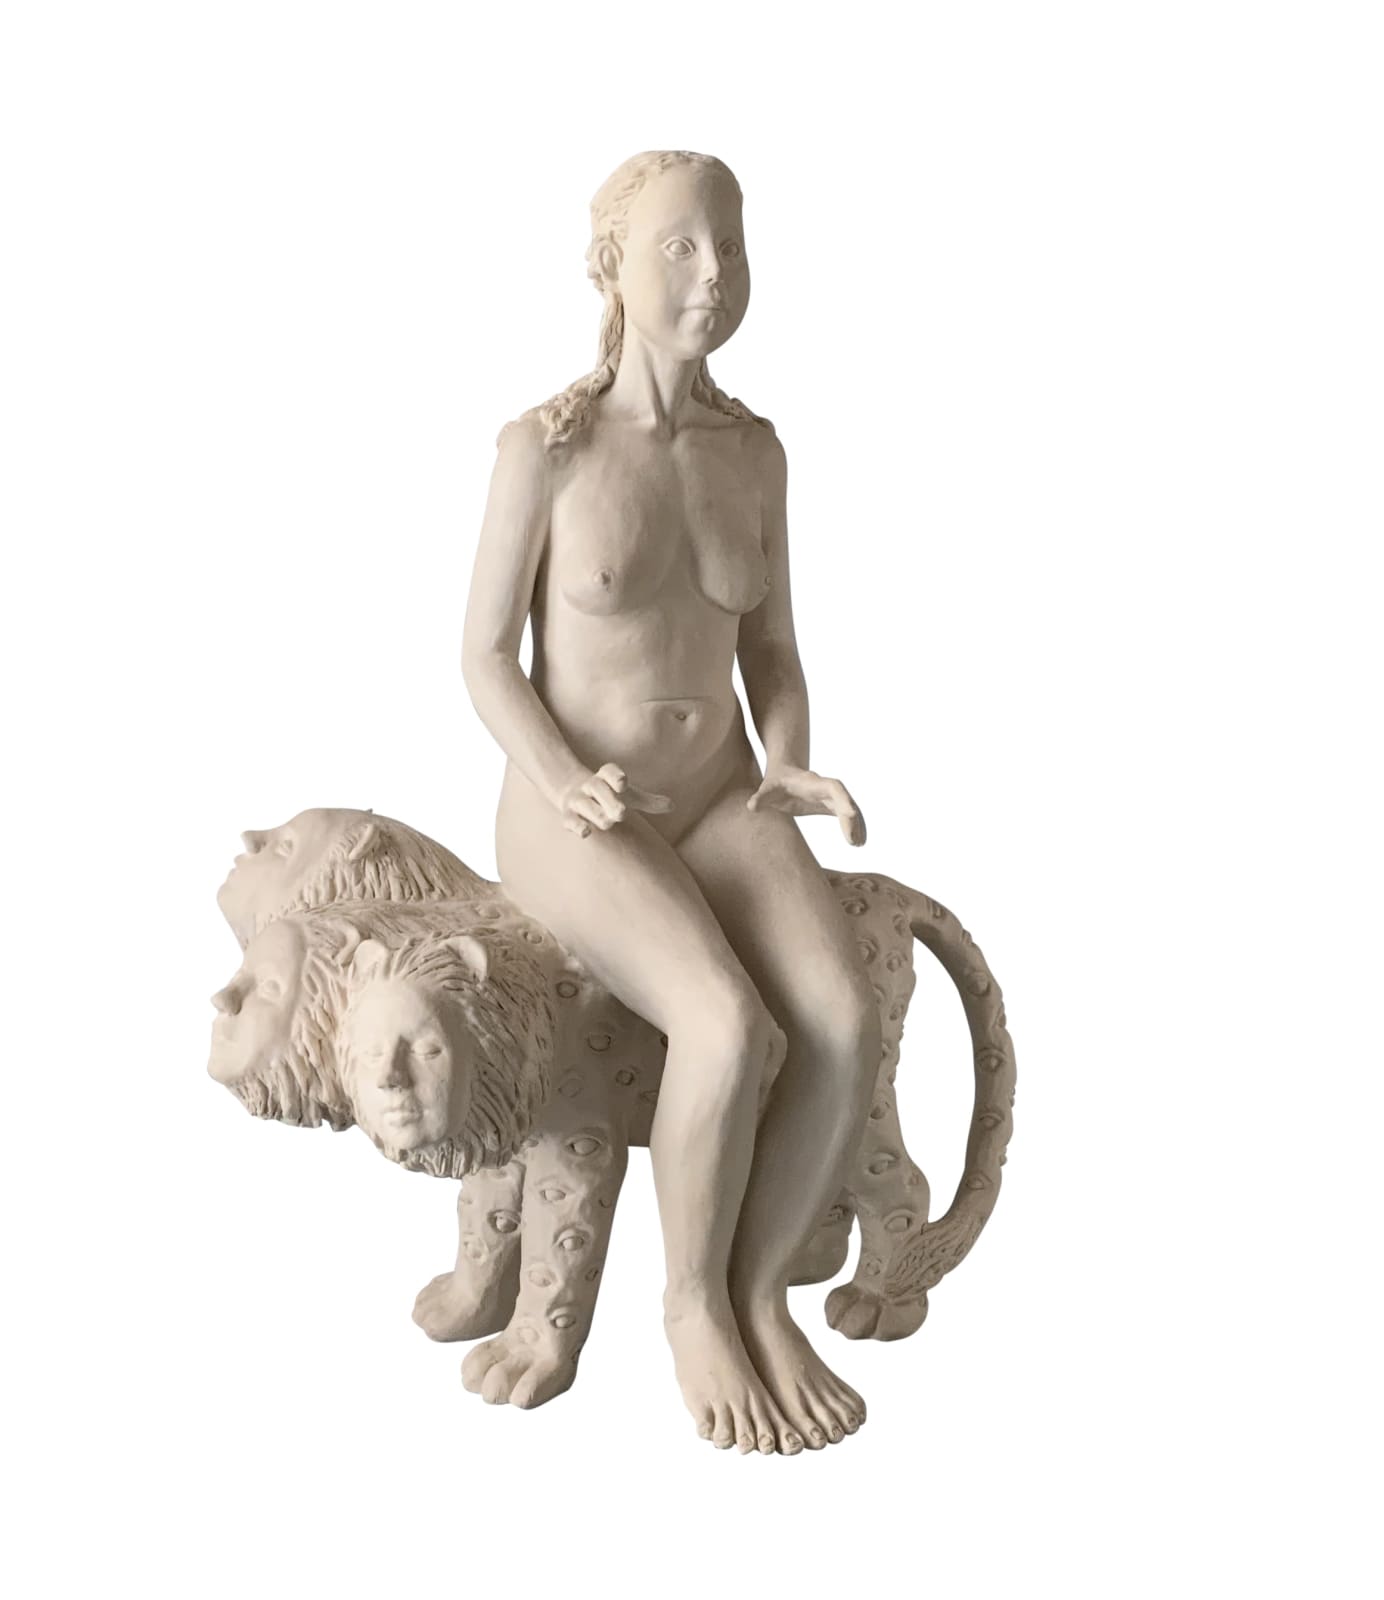 PSYCHE AND THE GATEKEEPER, 2015 Porcelain 15 x 12 x 7 in. 38.1 x 30.5 x 17.8 cm. (TC 23) $8,500